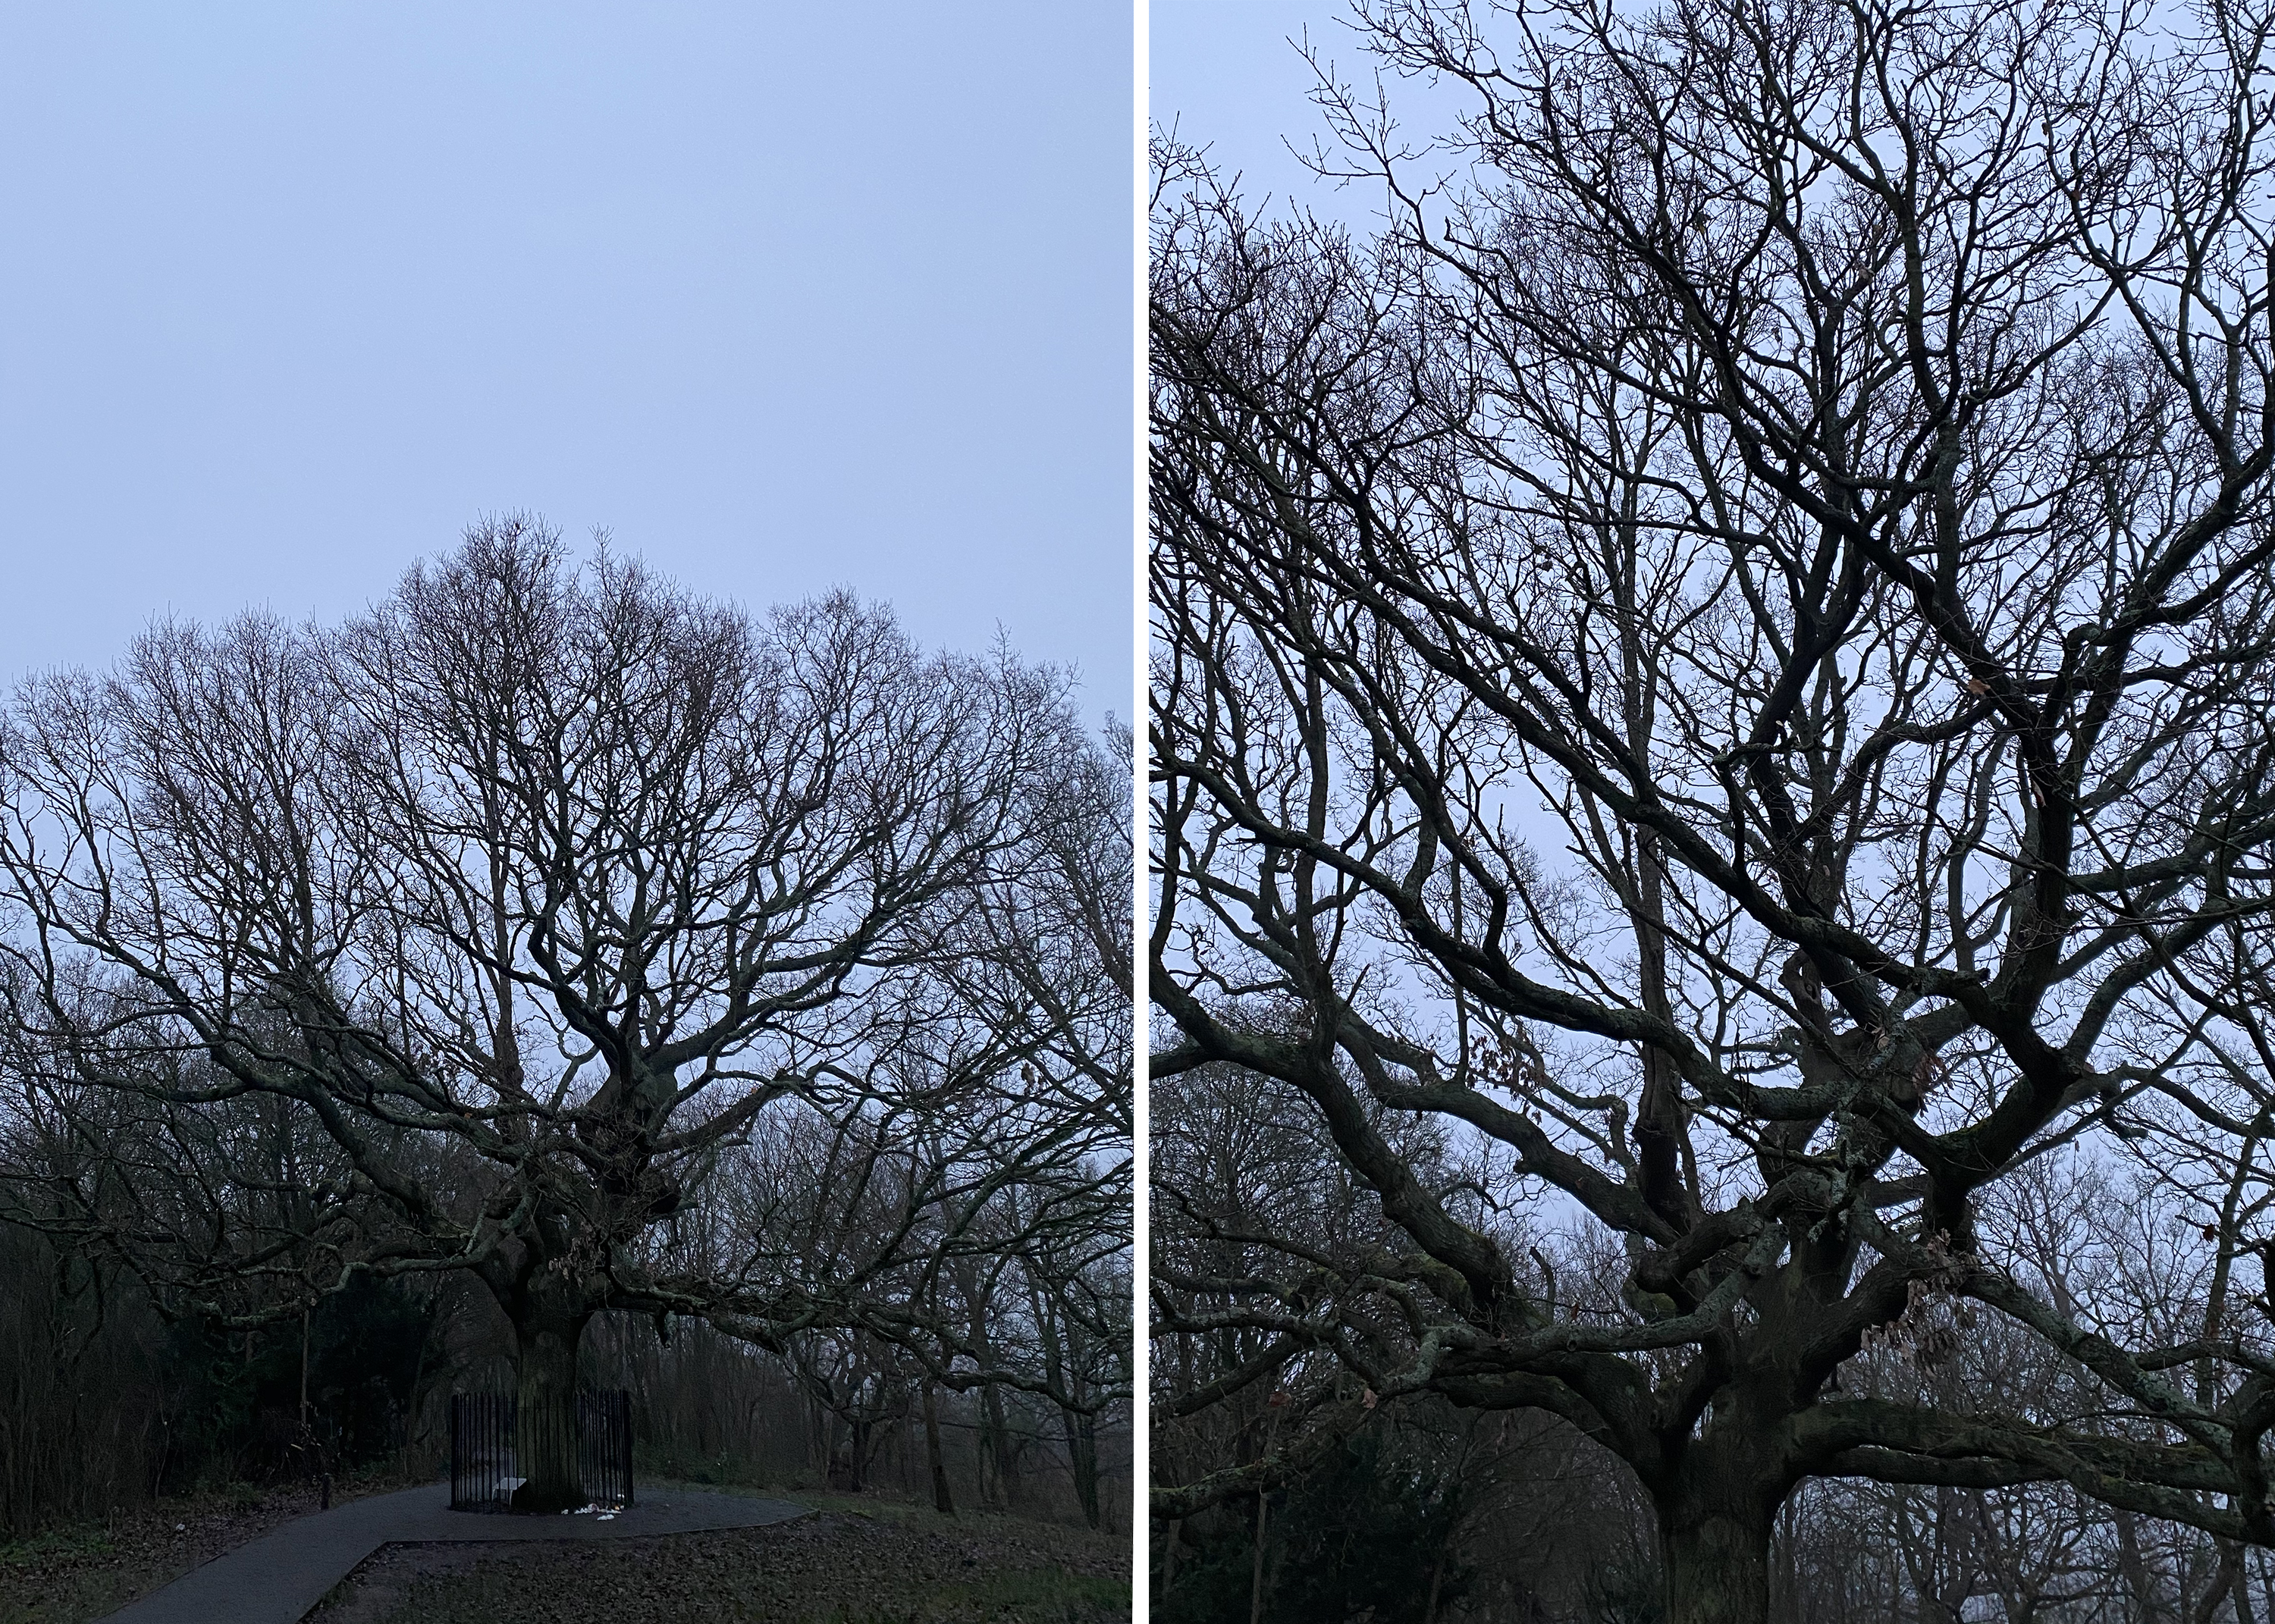 Two photos of the tree side by side, one zoomed out and one close up to the main trunk. It's a grey day and there are no leaves.